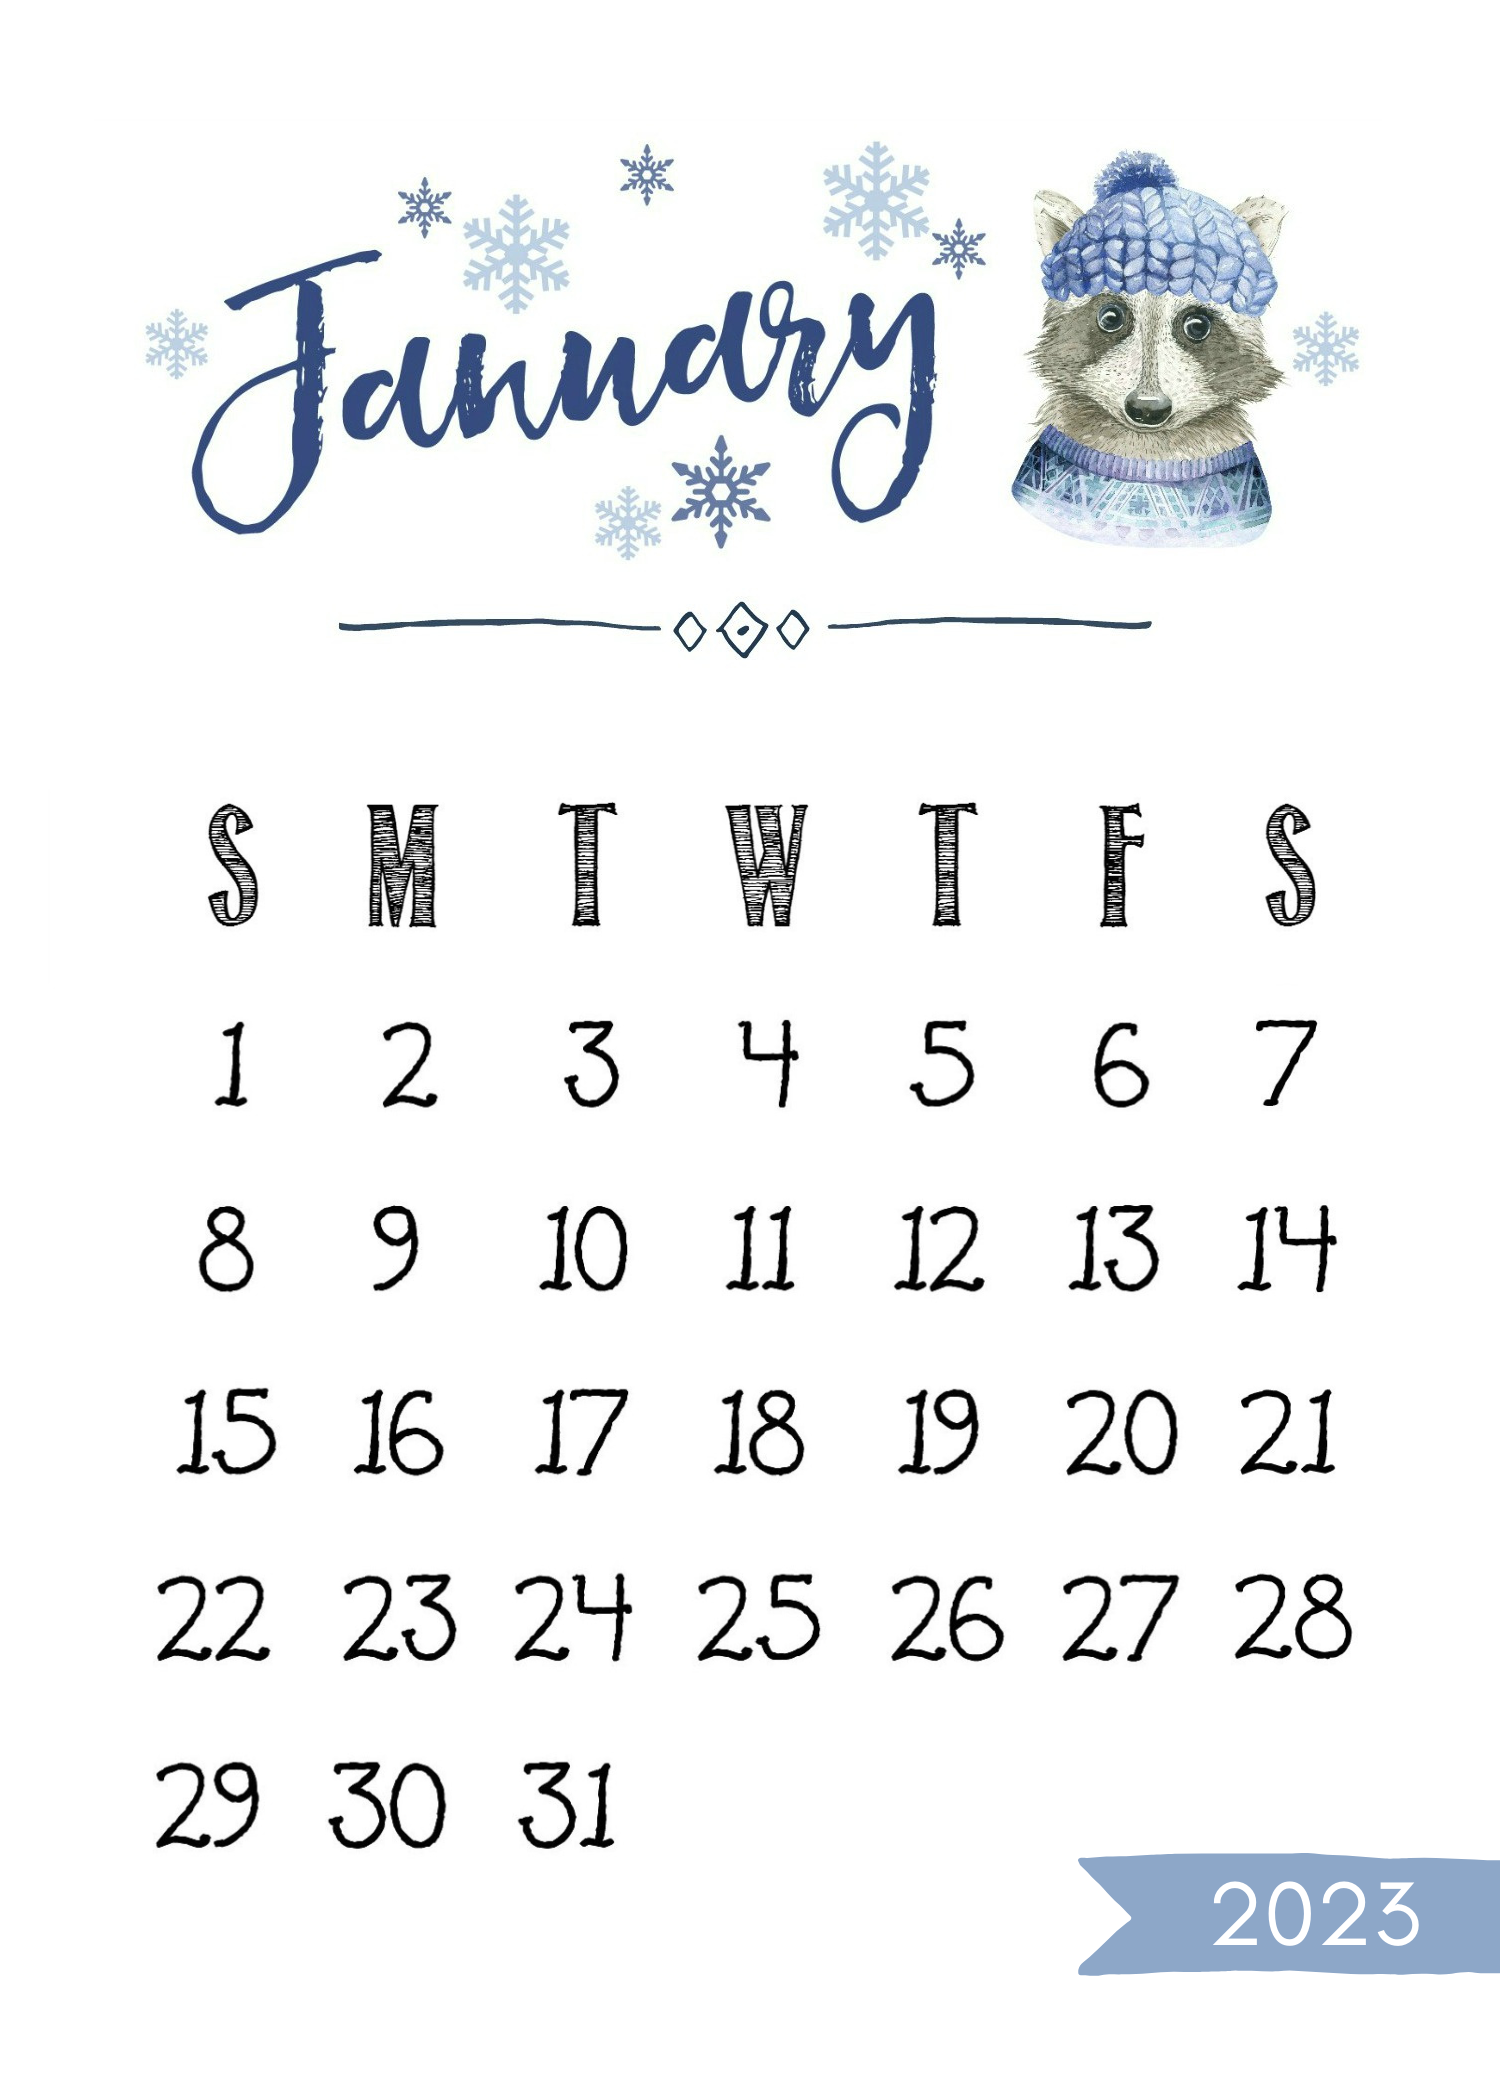 You can print the January page of the 2023 calendar.